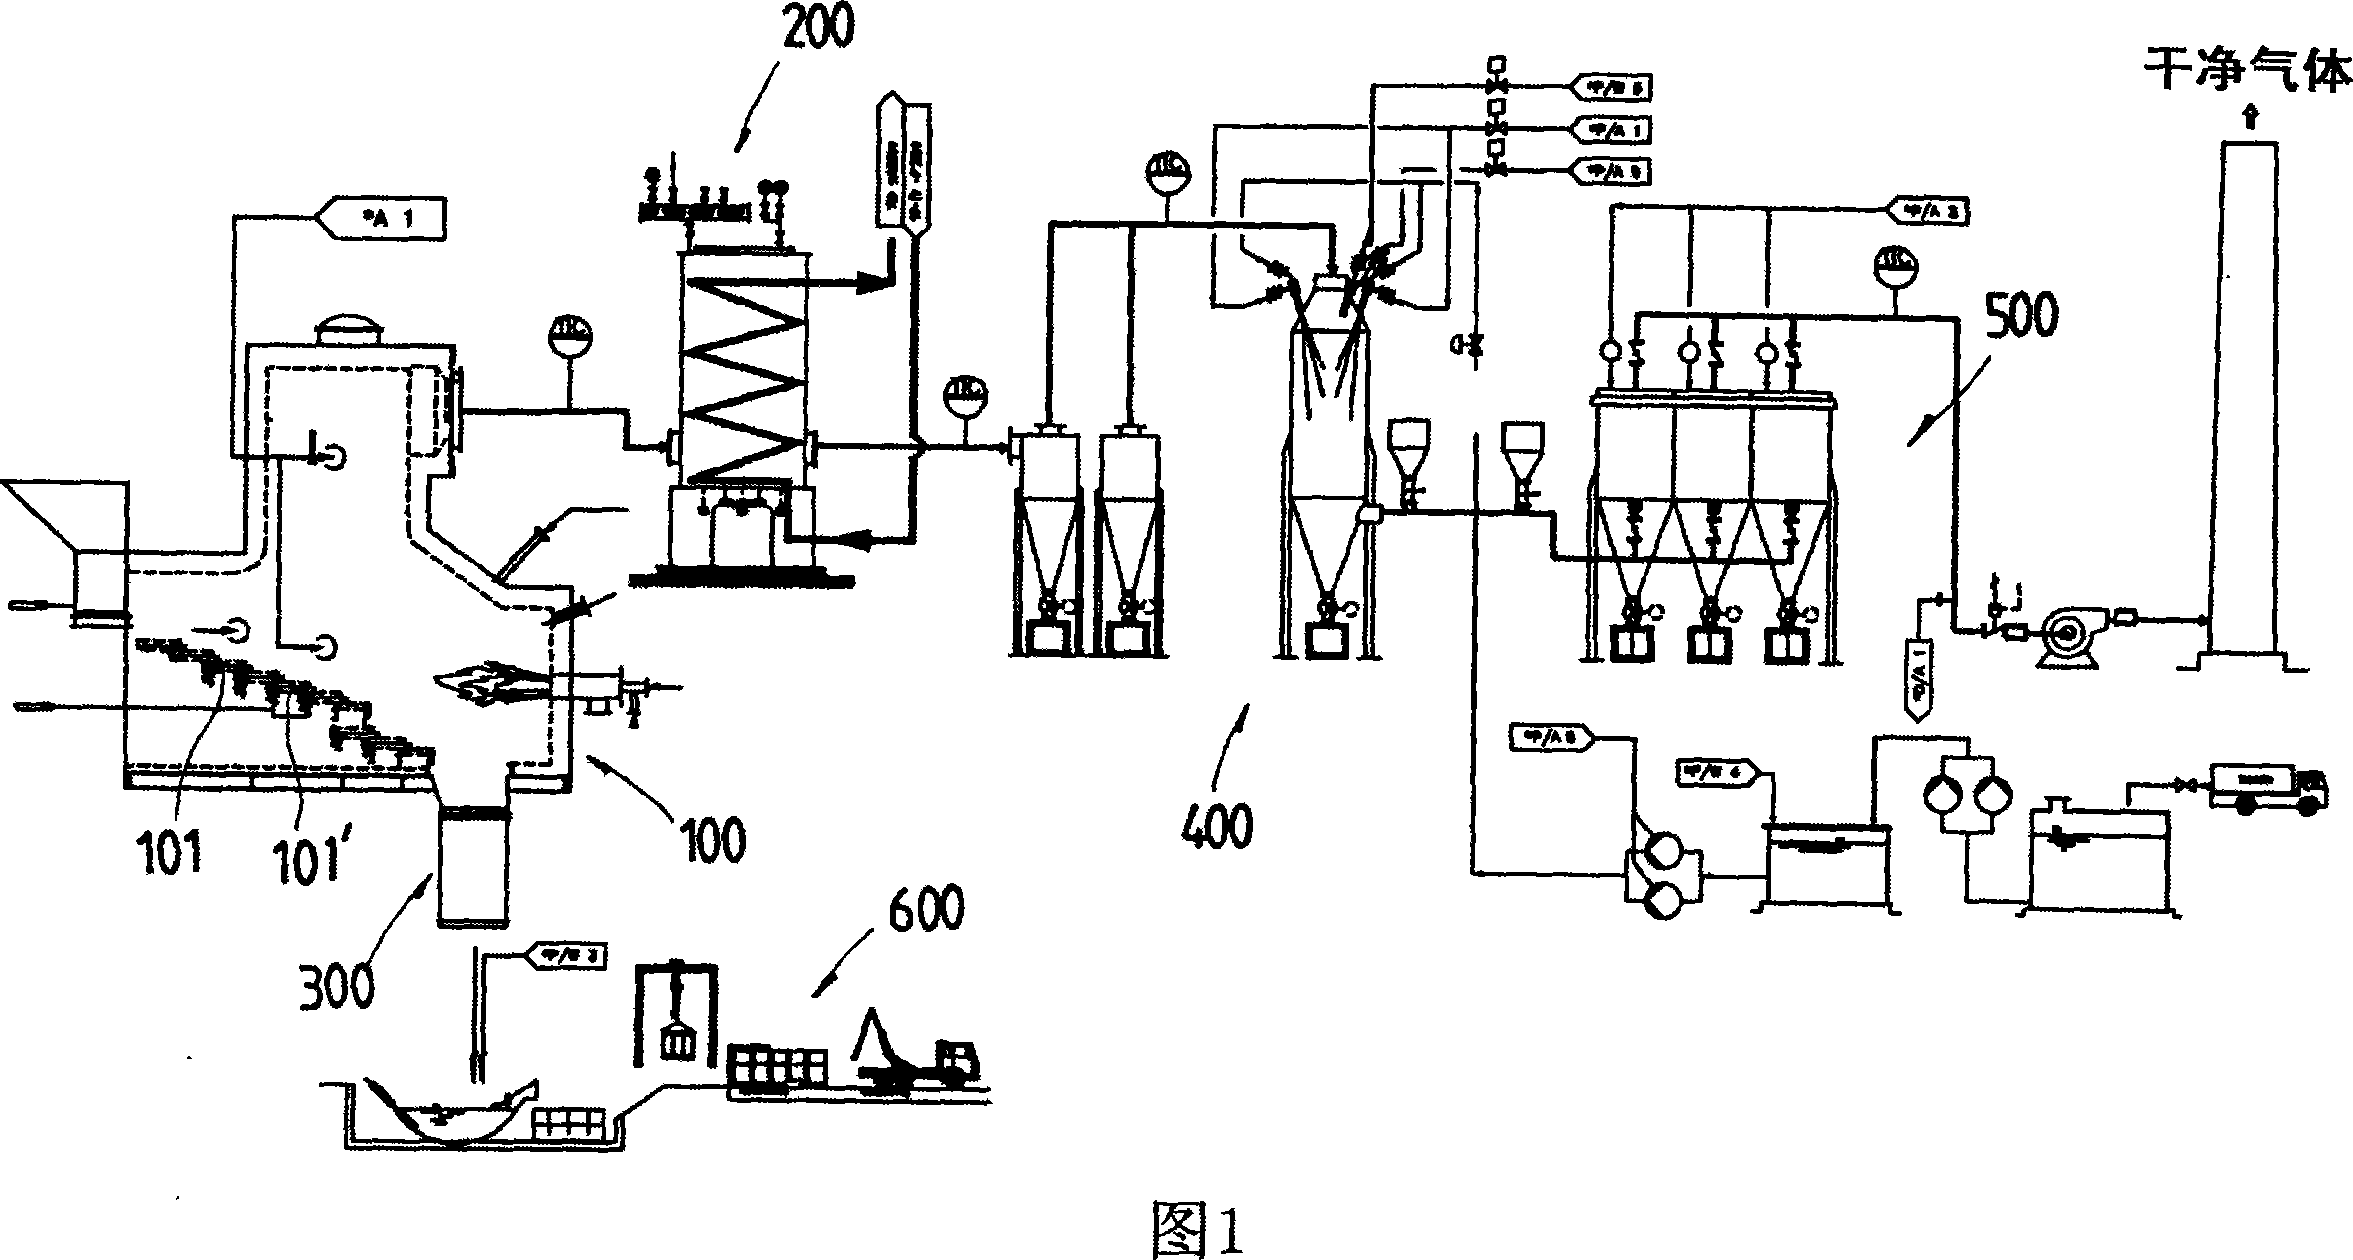 Combustion apparatus for r.p.f boiler